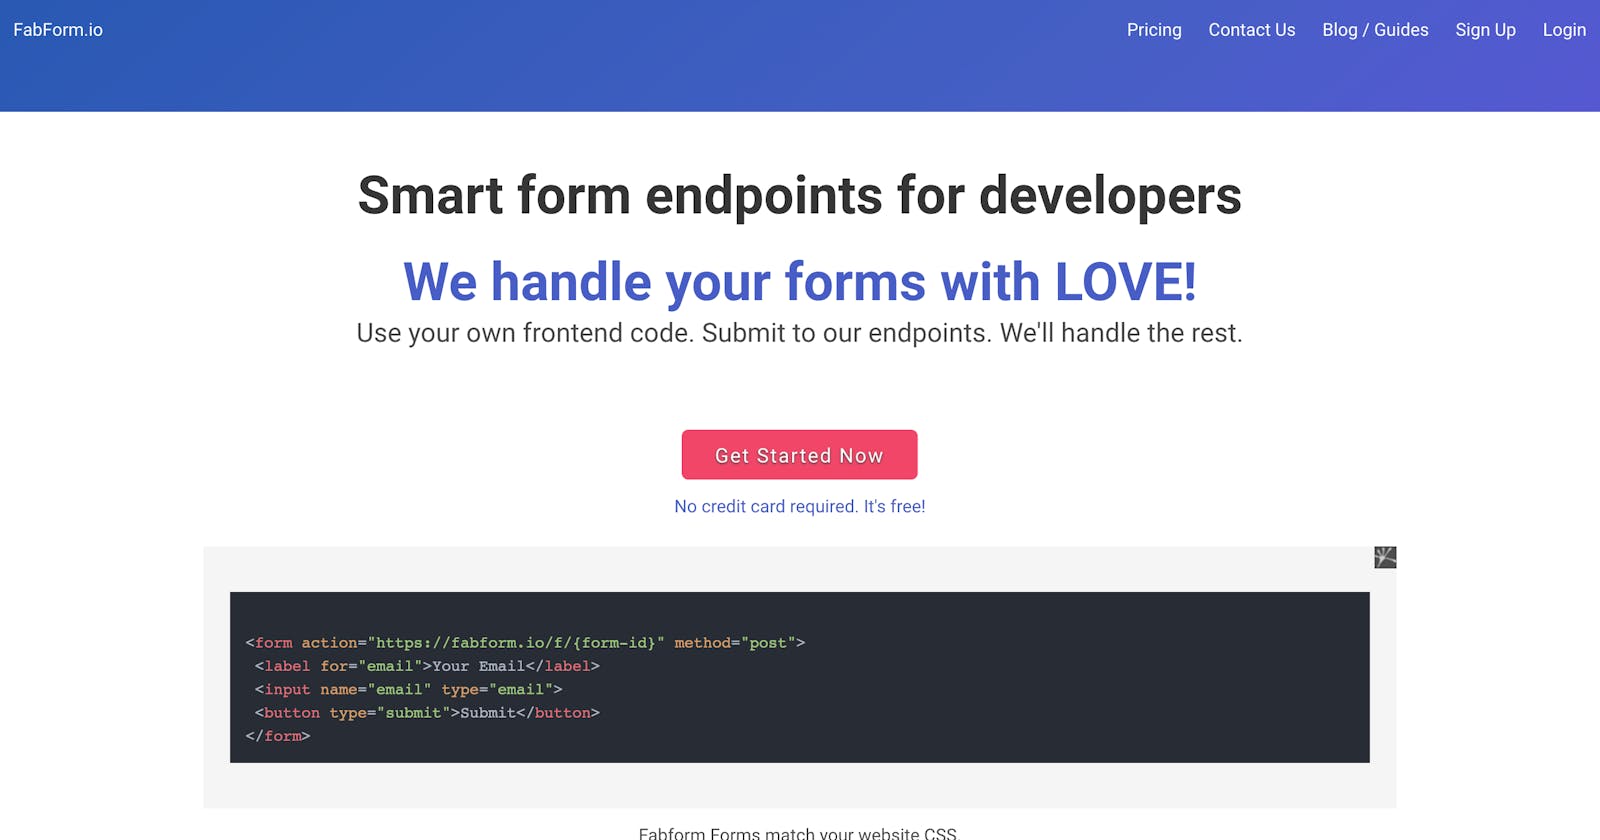 Endpoints for smart forms for developers